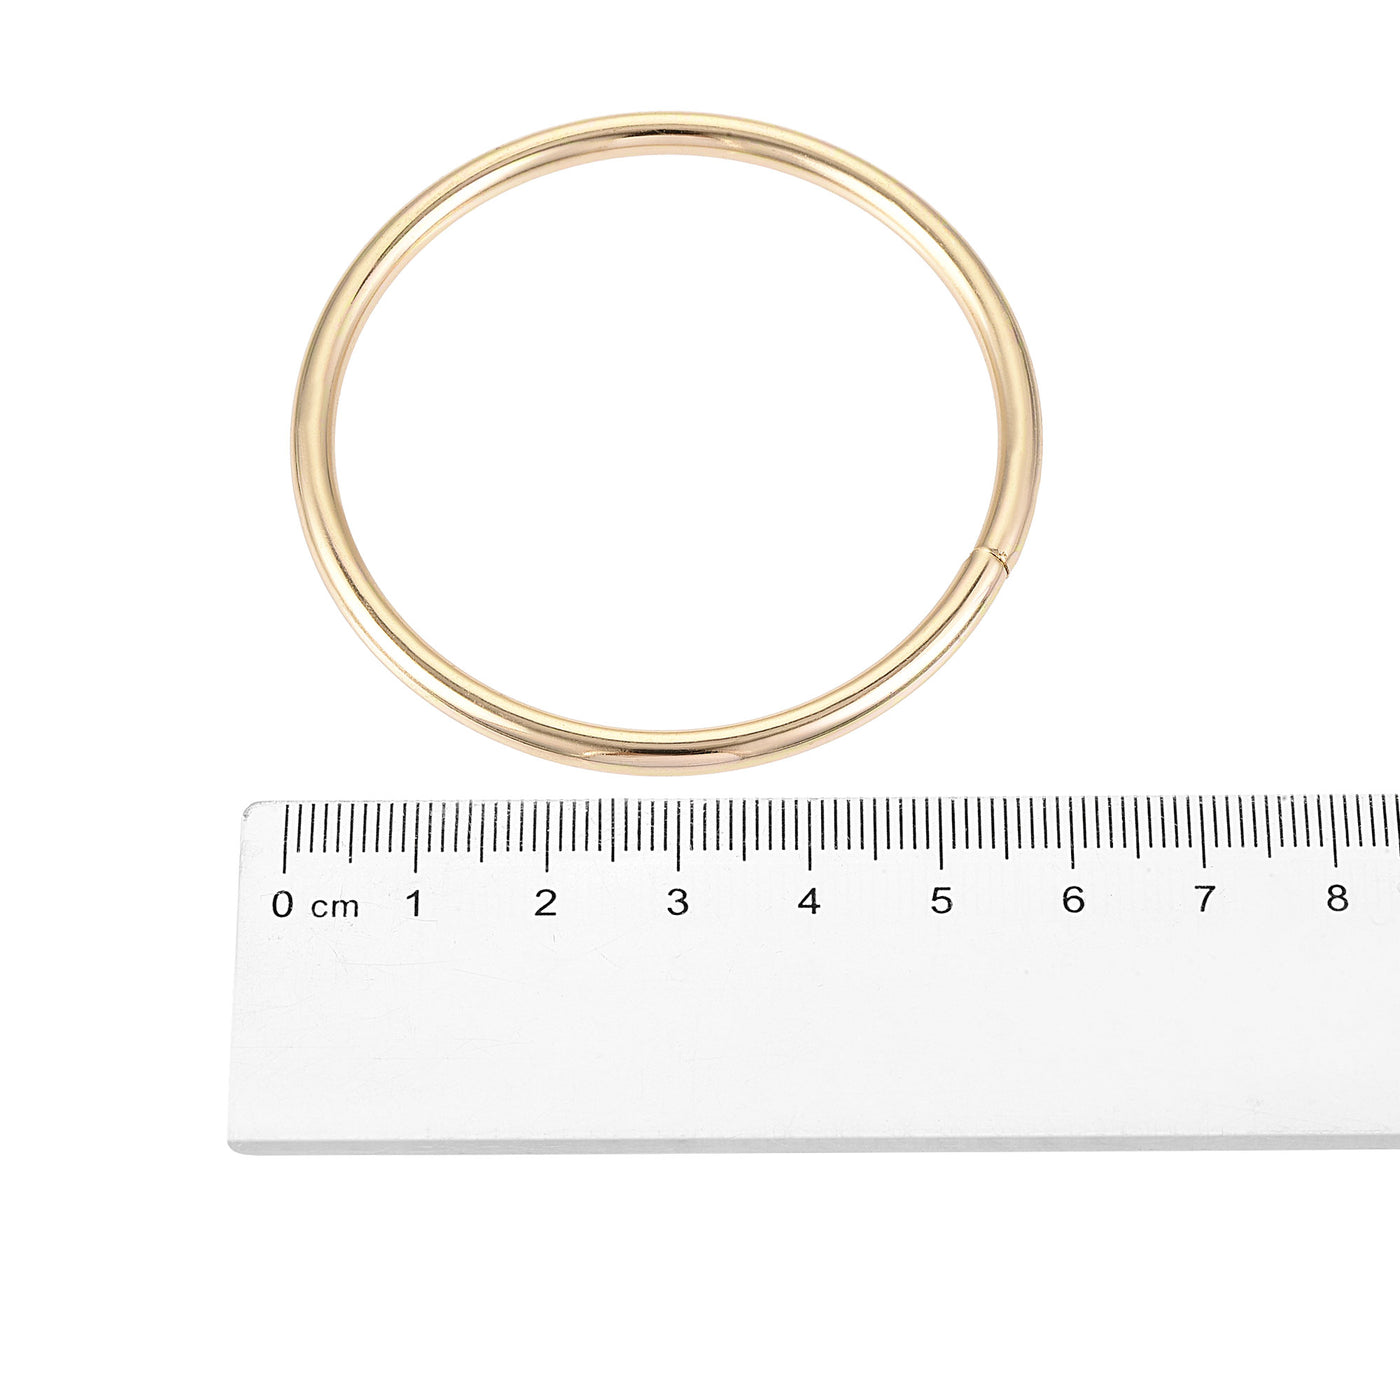 uxcell Uxcell 50mm Metal O Rings Non-Welded for Straps Bags Belts DIY Gold Tone 2pcs